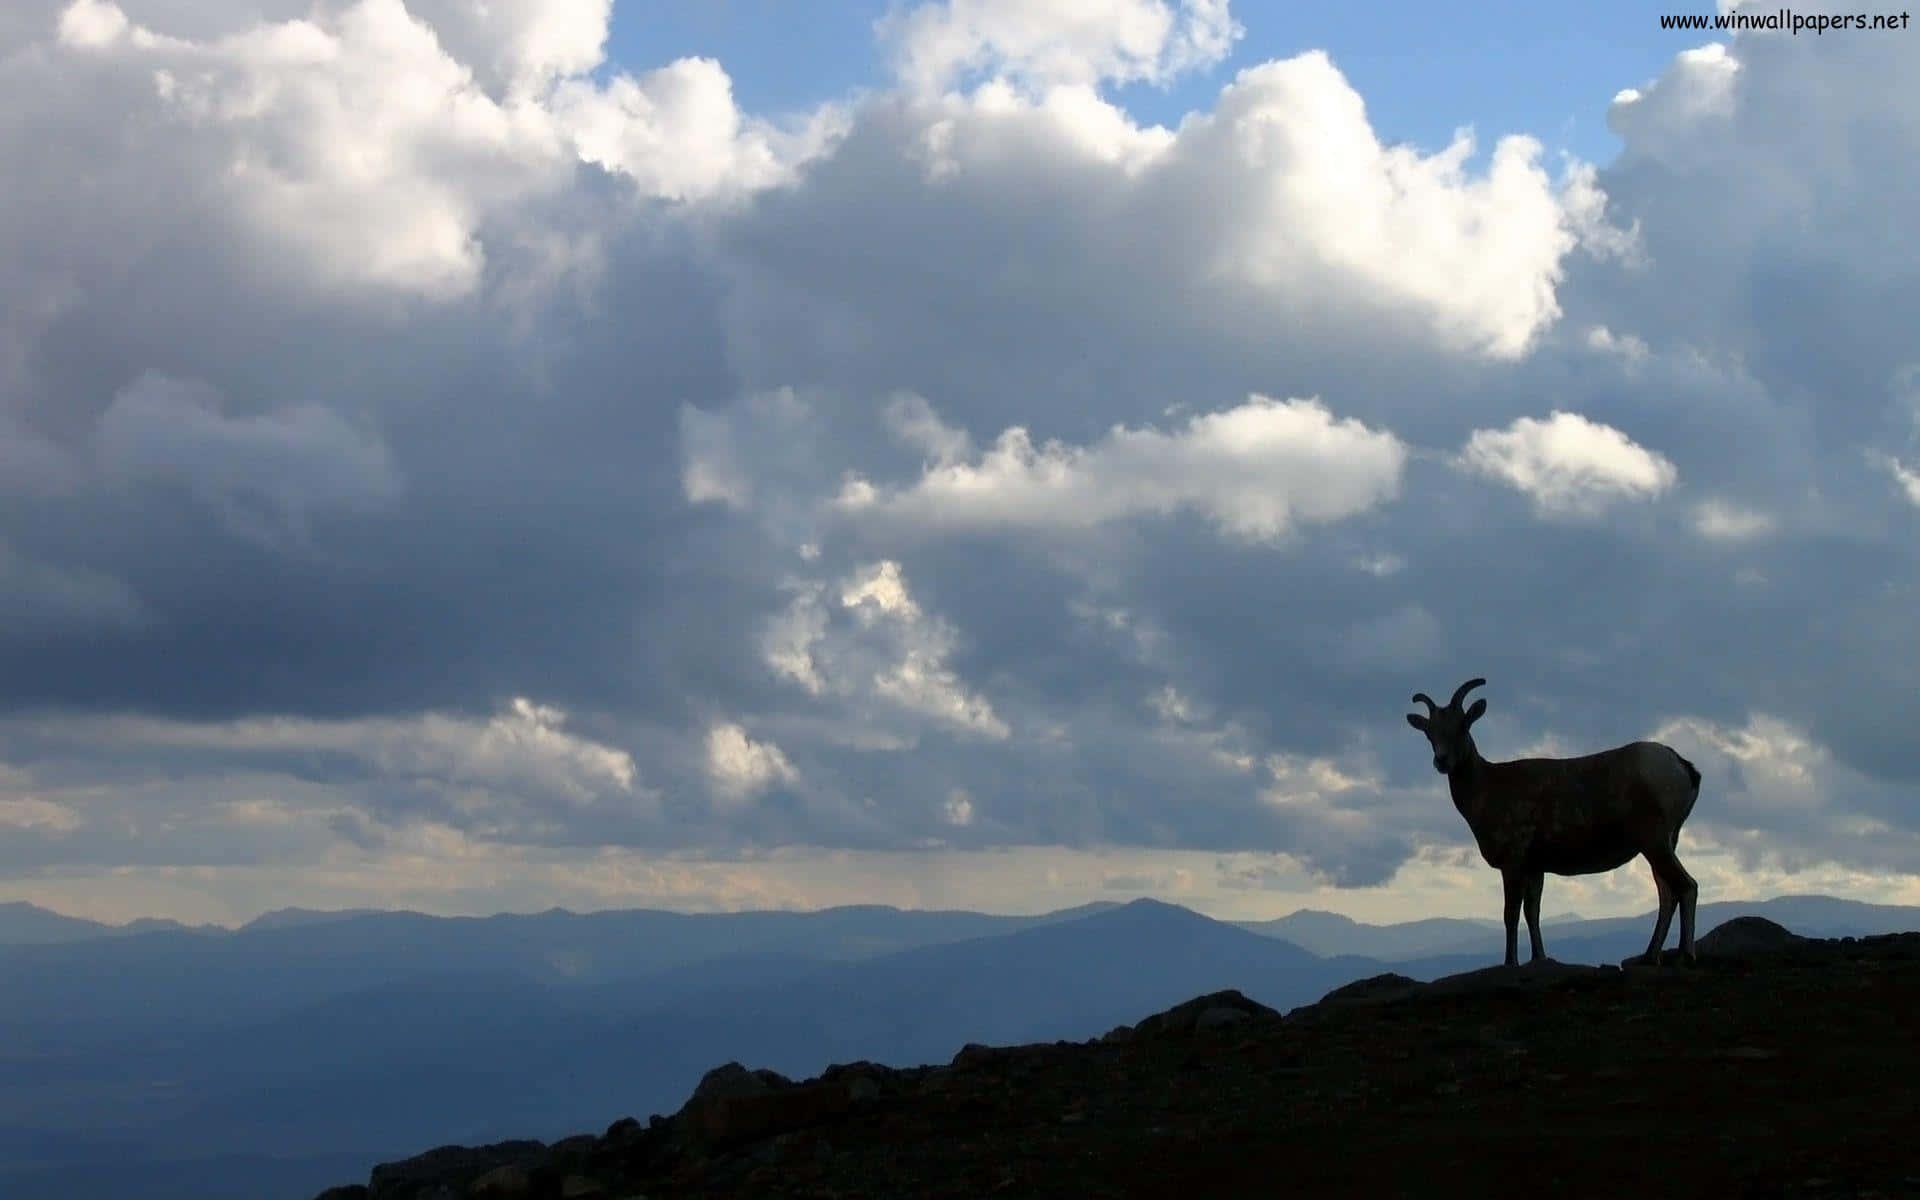 A Deer Stands On Top Of A Mountain With Clouds In The Background